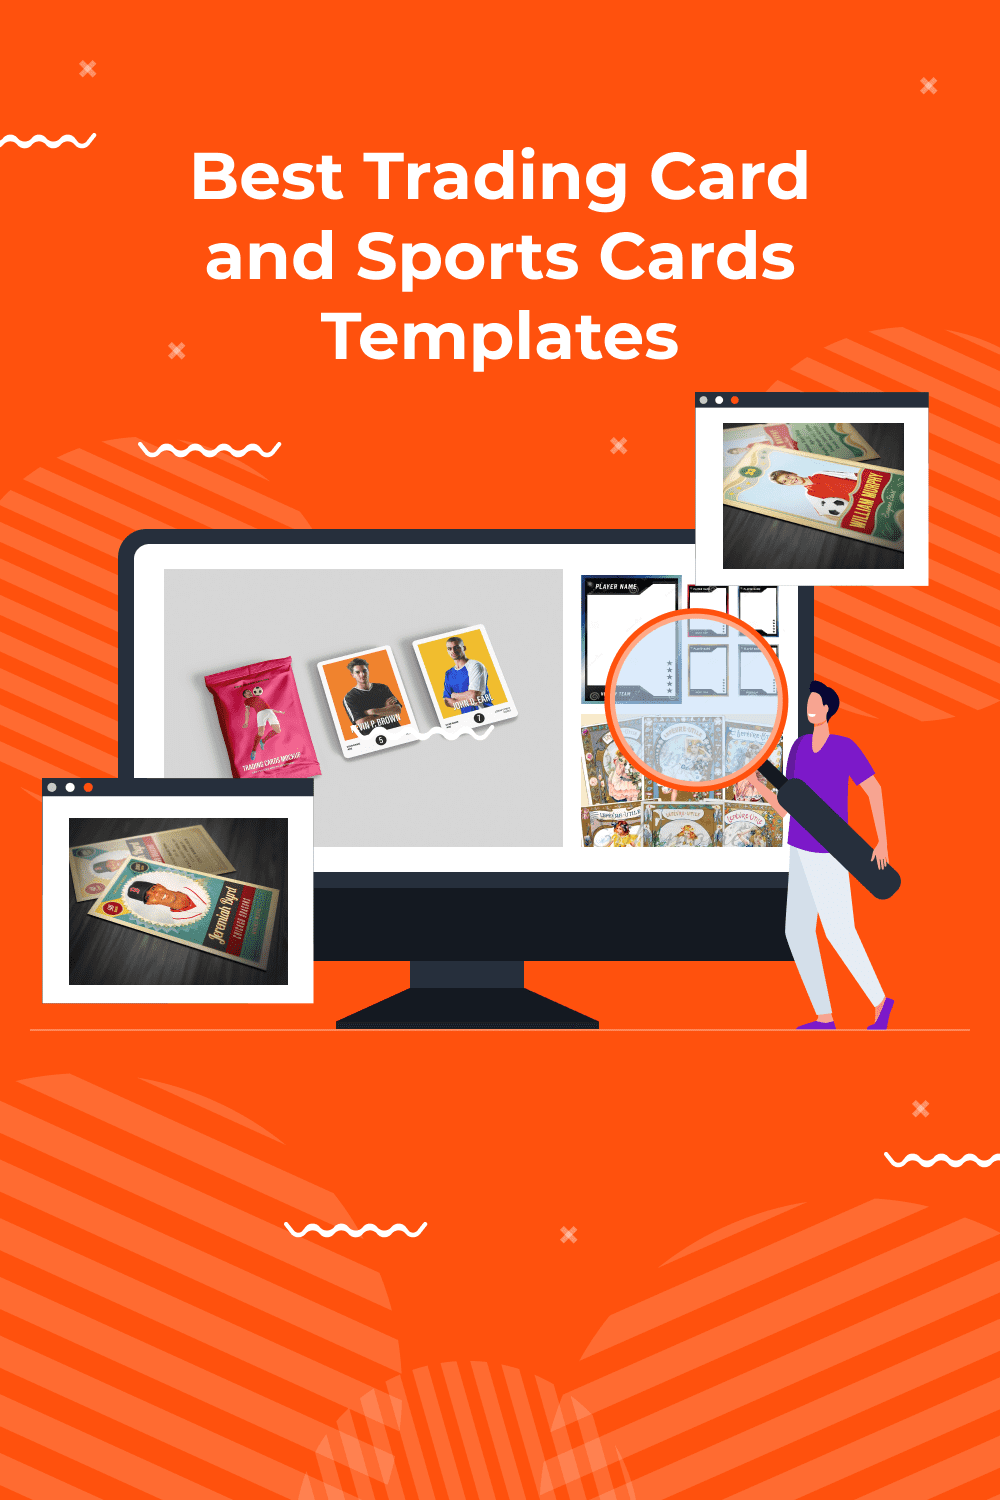 Best trading card and sports cards templates.